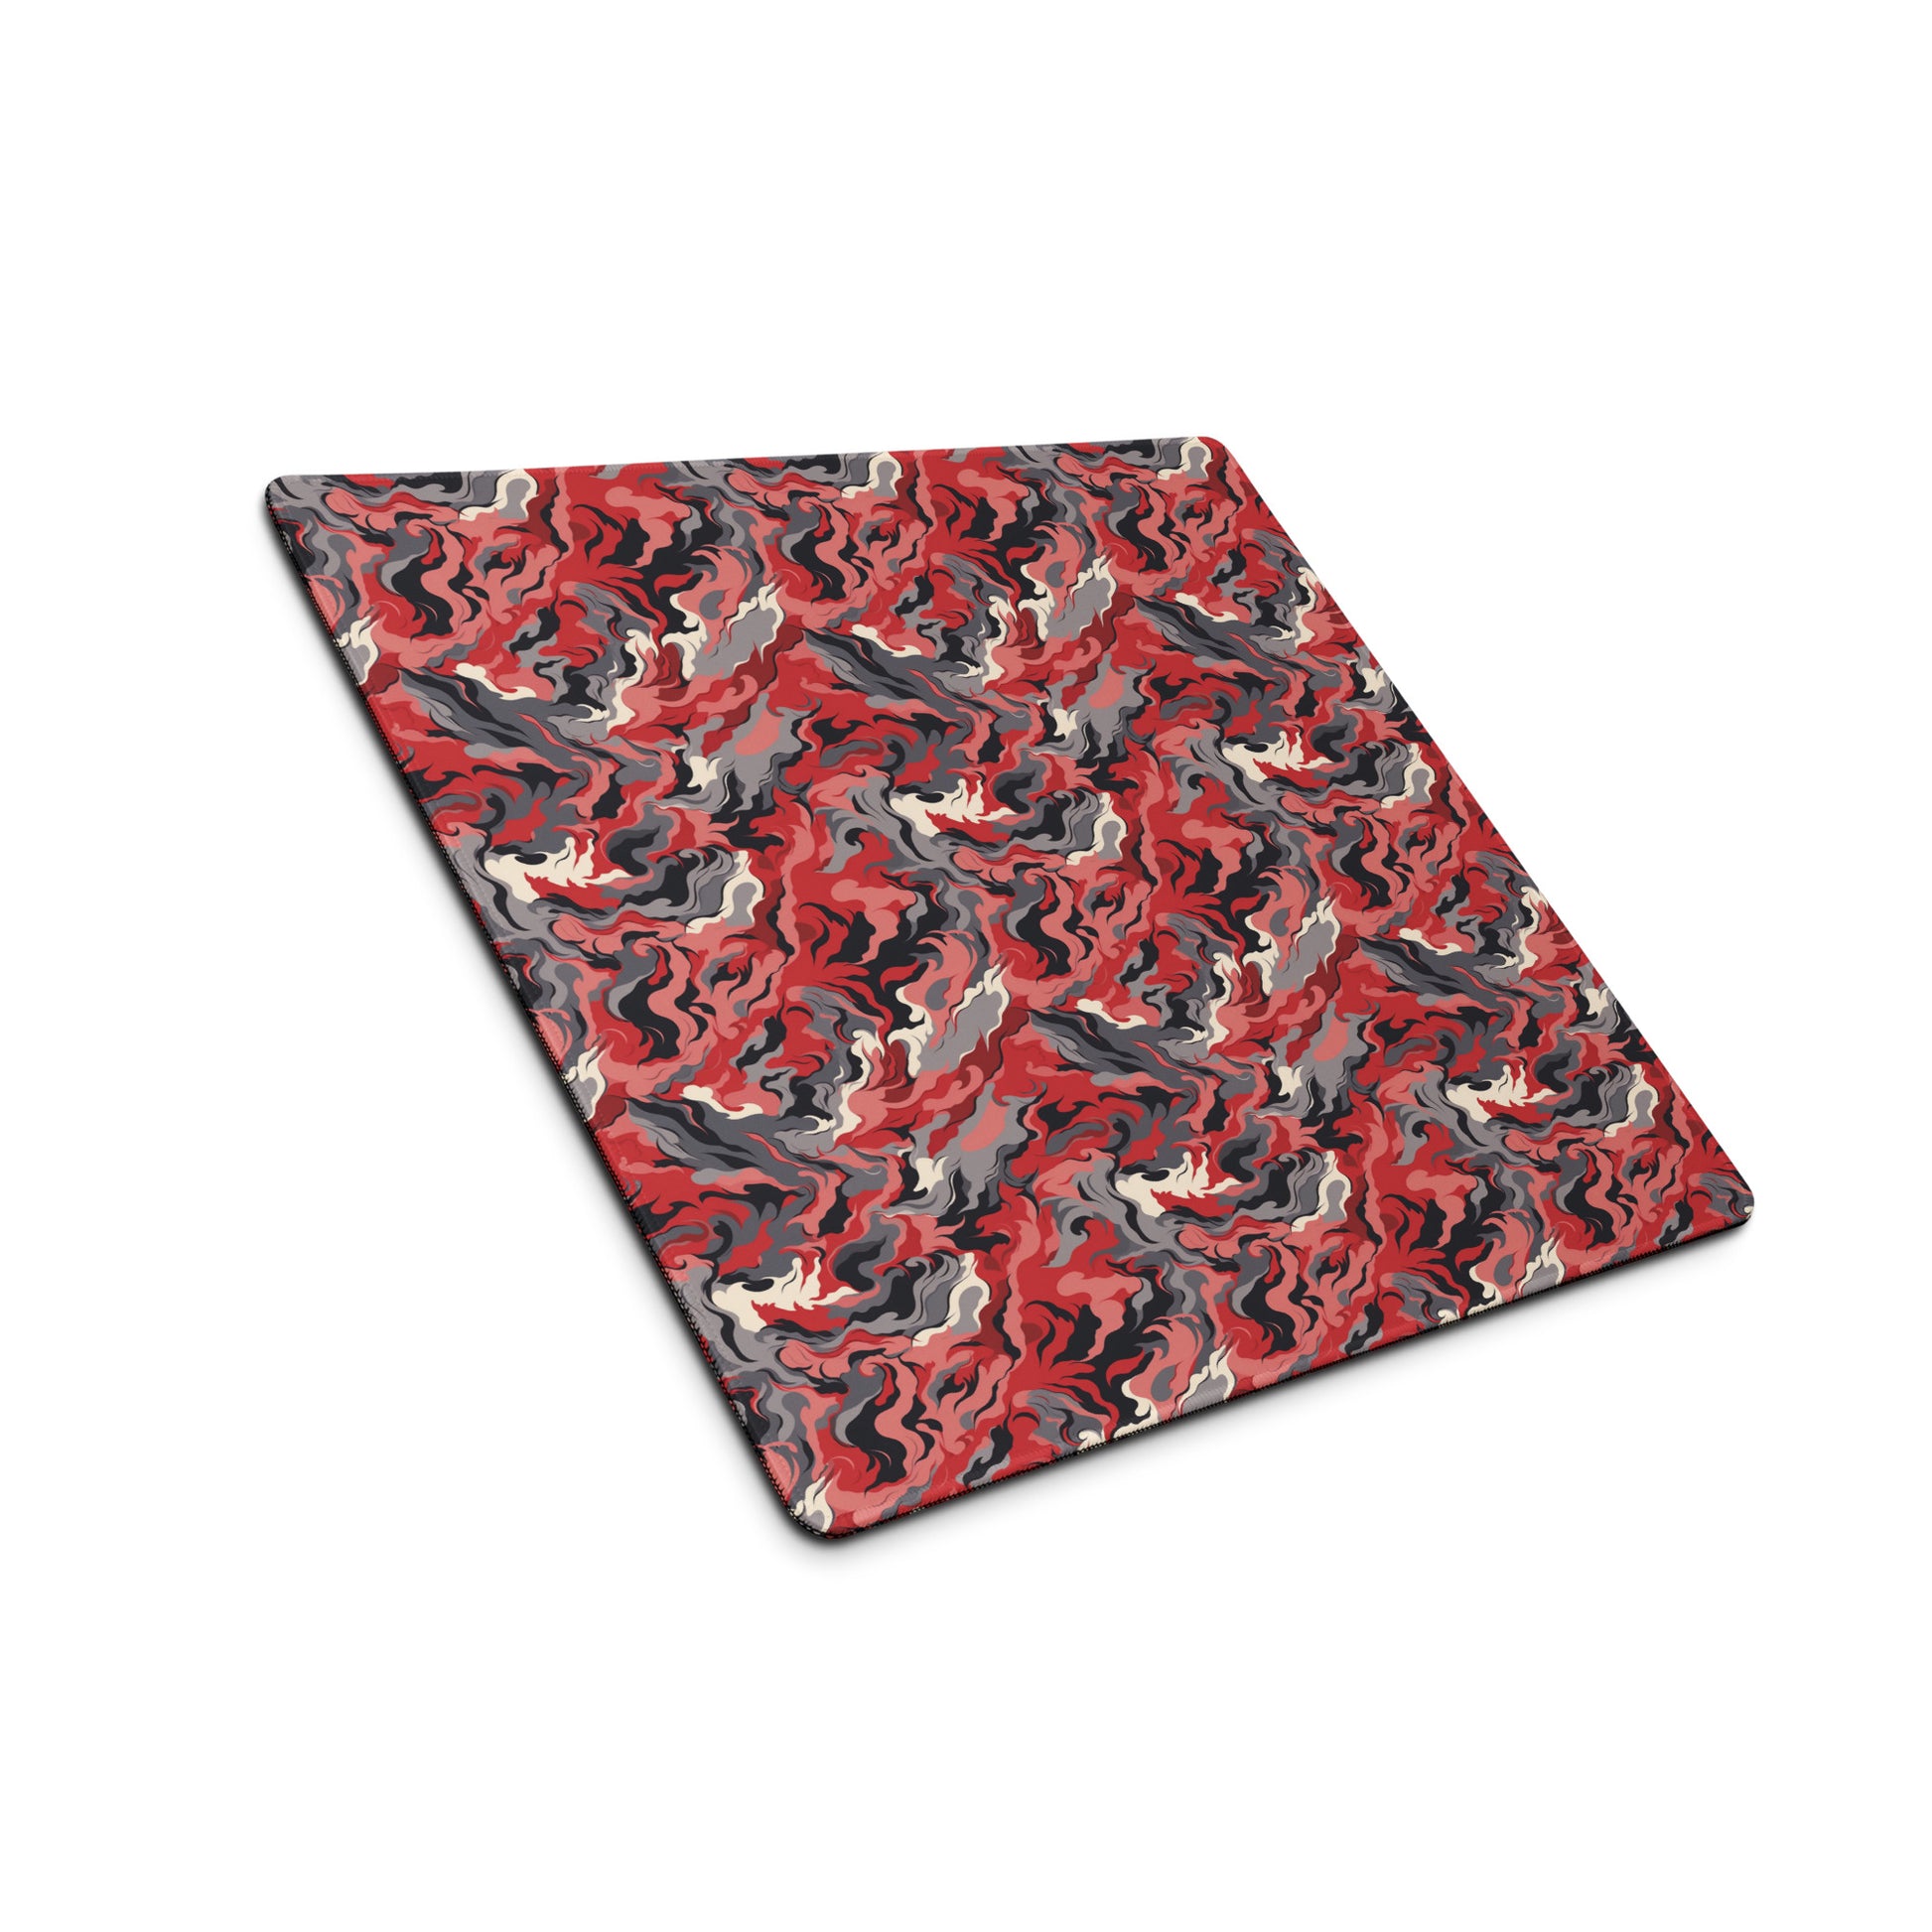 A 18" x 16" desk pad with a grey and red camo pattern sitting at an angle.